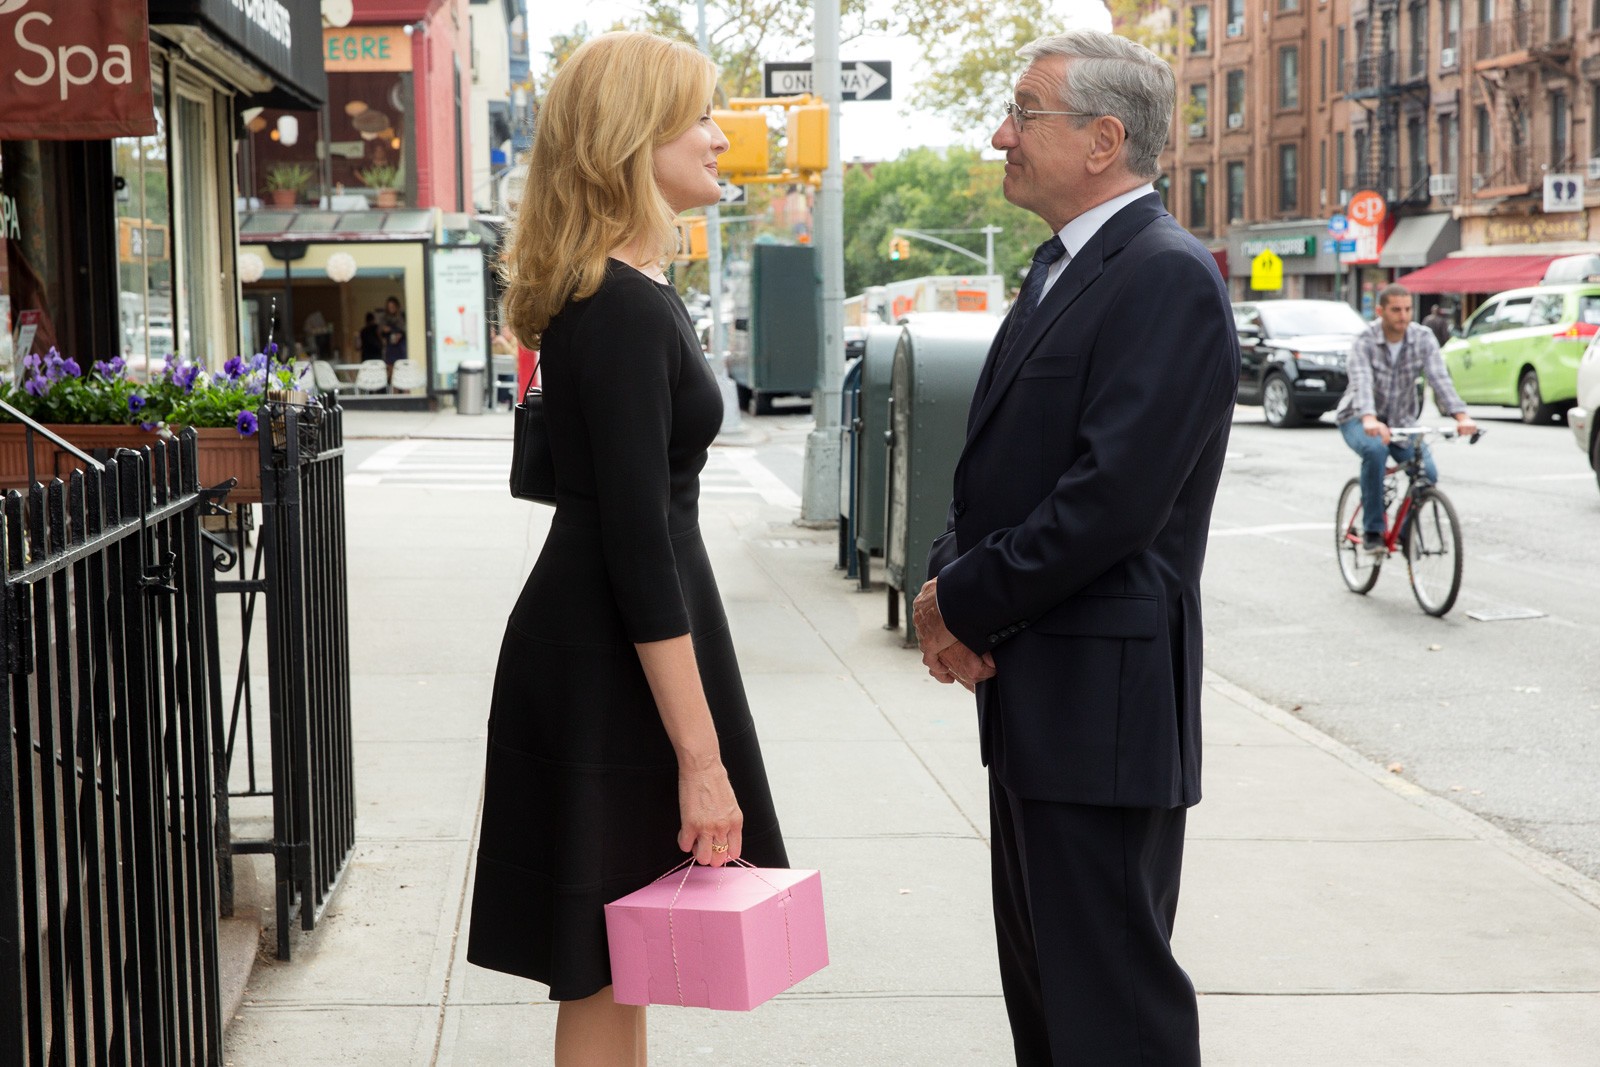 Rene Russo stars as Fiona and Robert De Niro stars as Ben Whittaker in Warner Bros. Pictures' The Intern (2015)